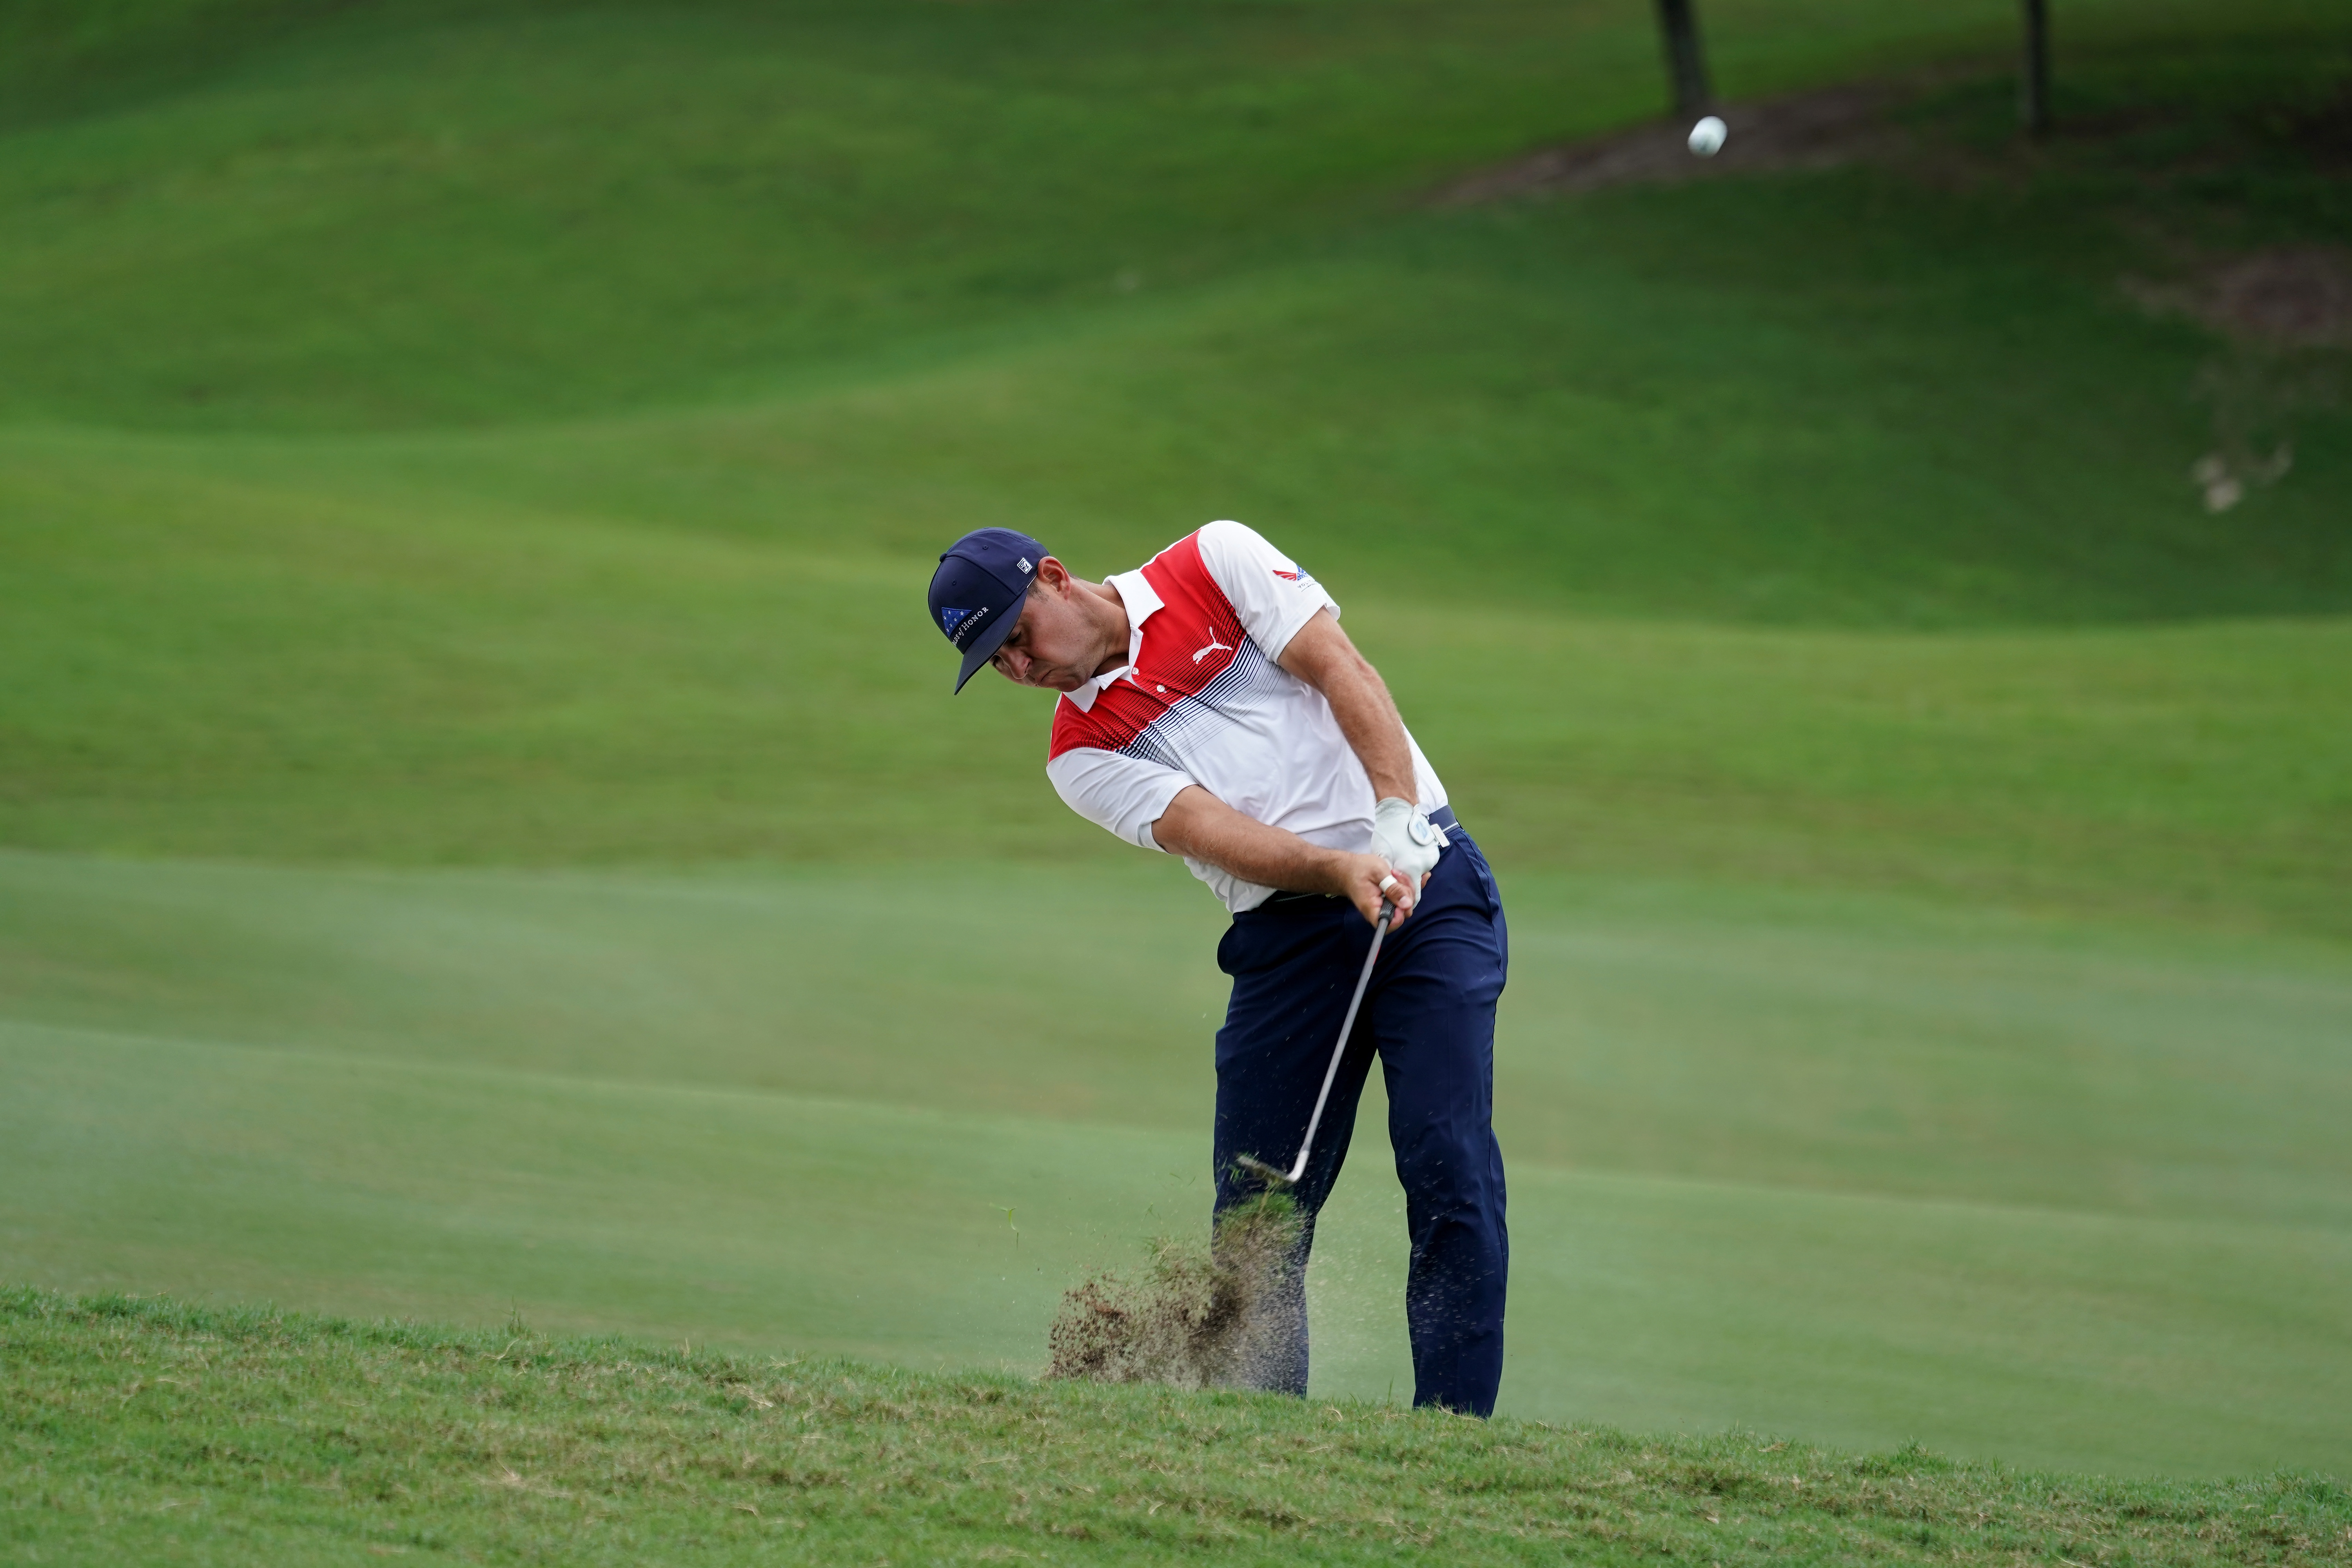 Gary Woodland birdies way to tie with Leishman and Sharma after three rounds of the CIMB Classic